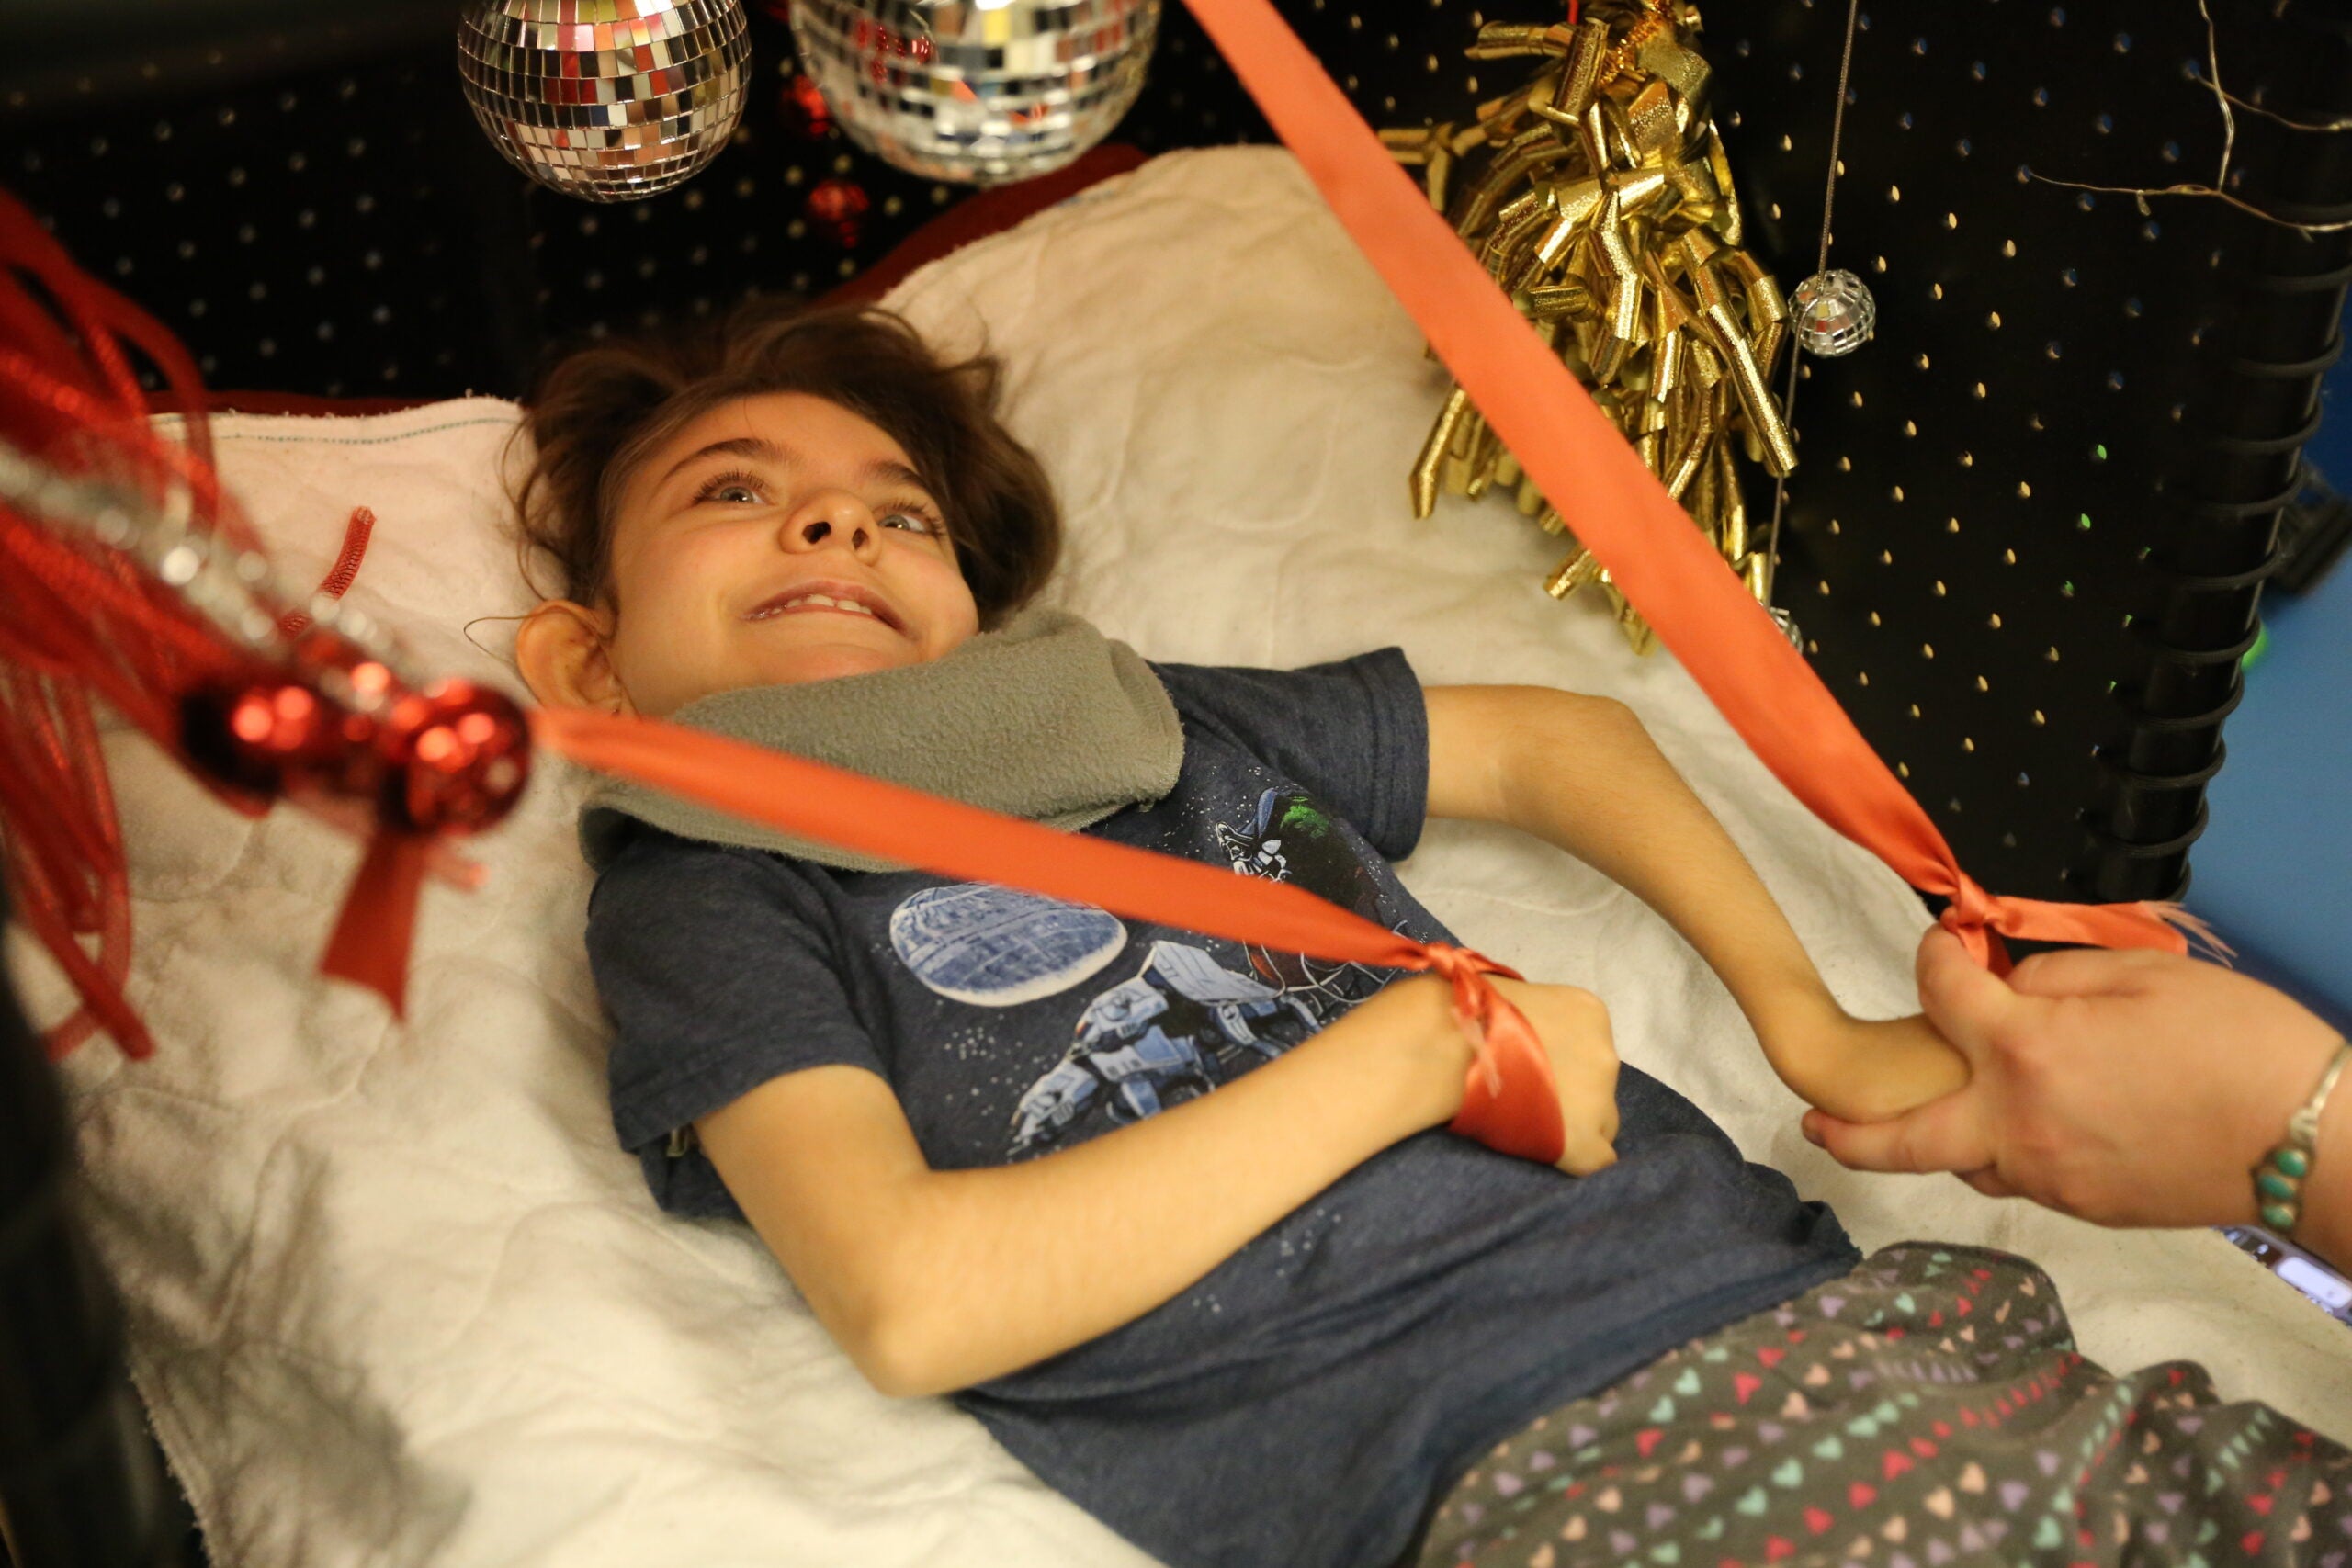 Student lays in tiny room, plays with red ribbons and smiles while looking at disco balls.